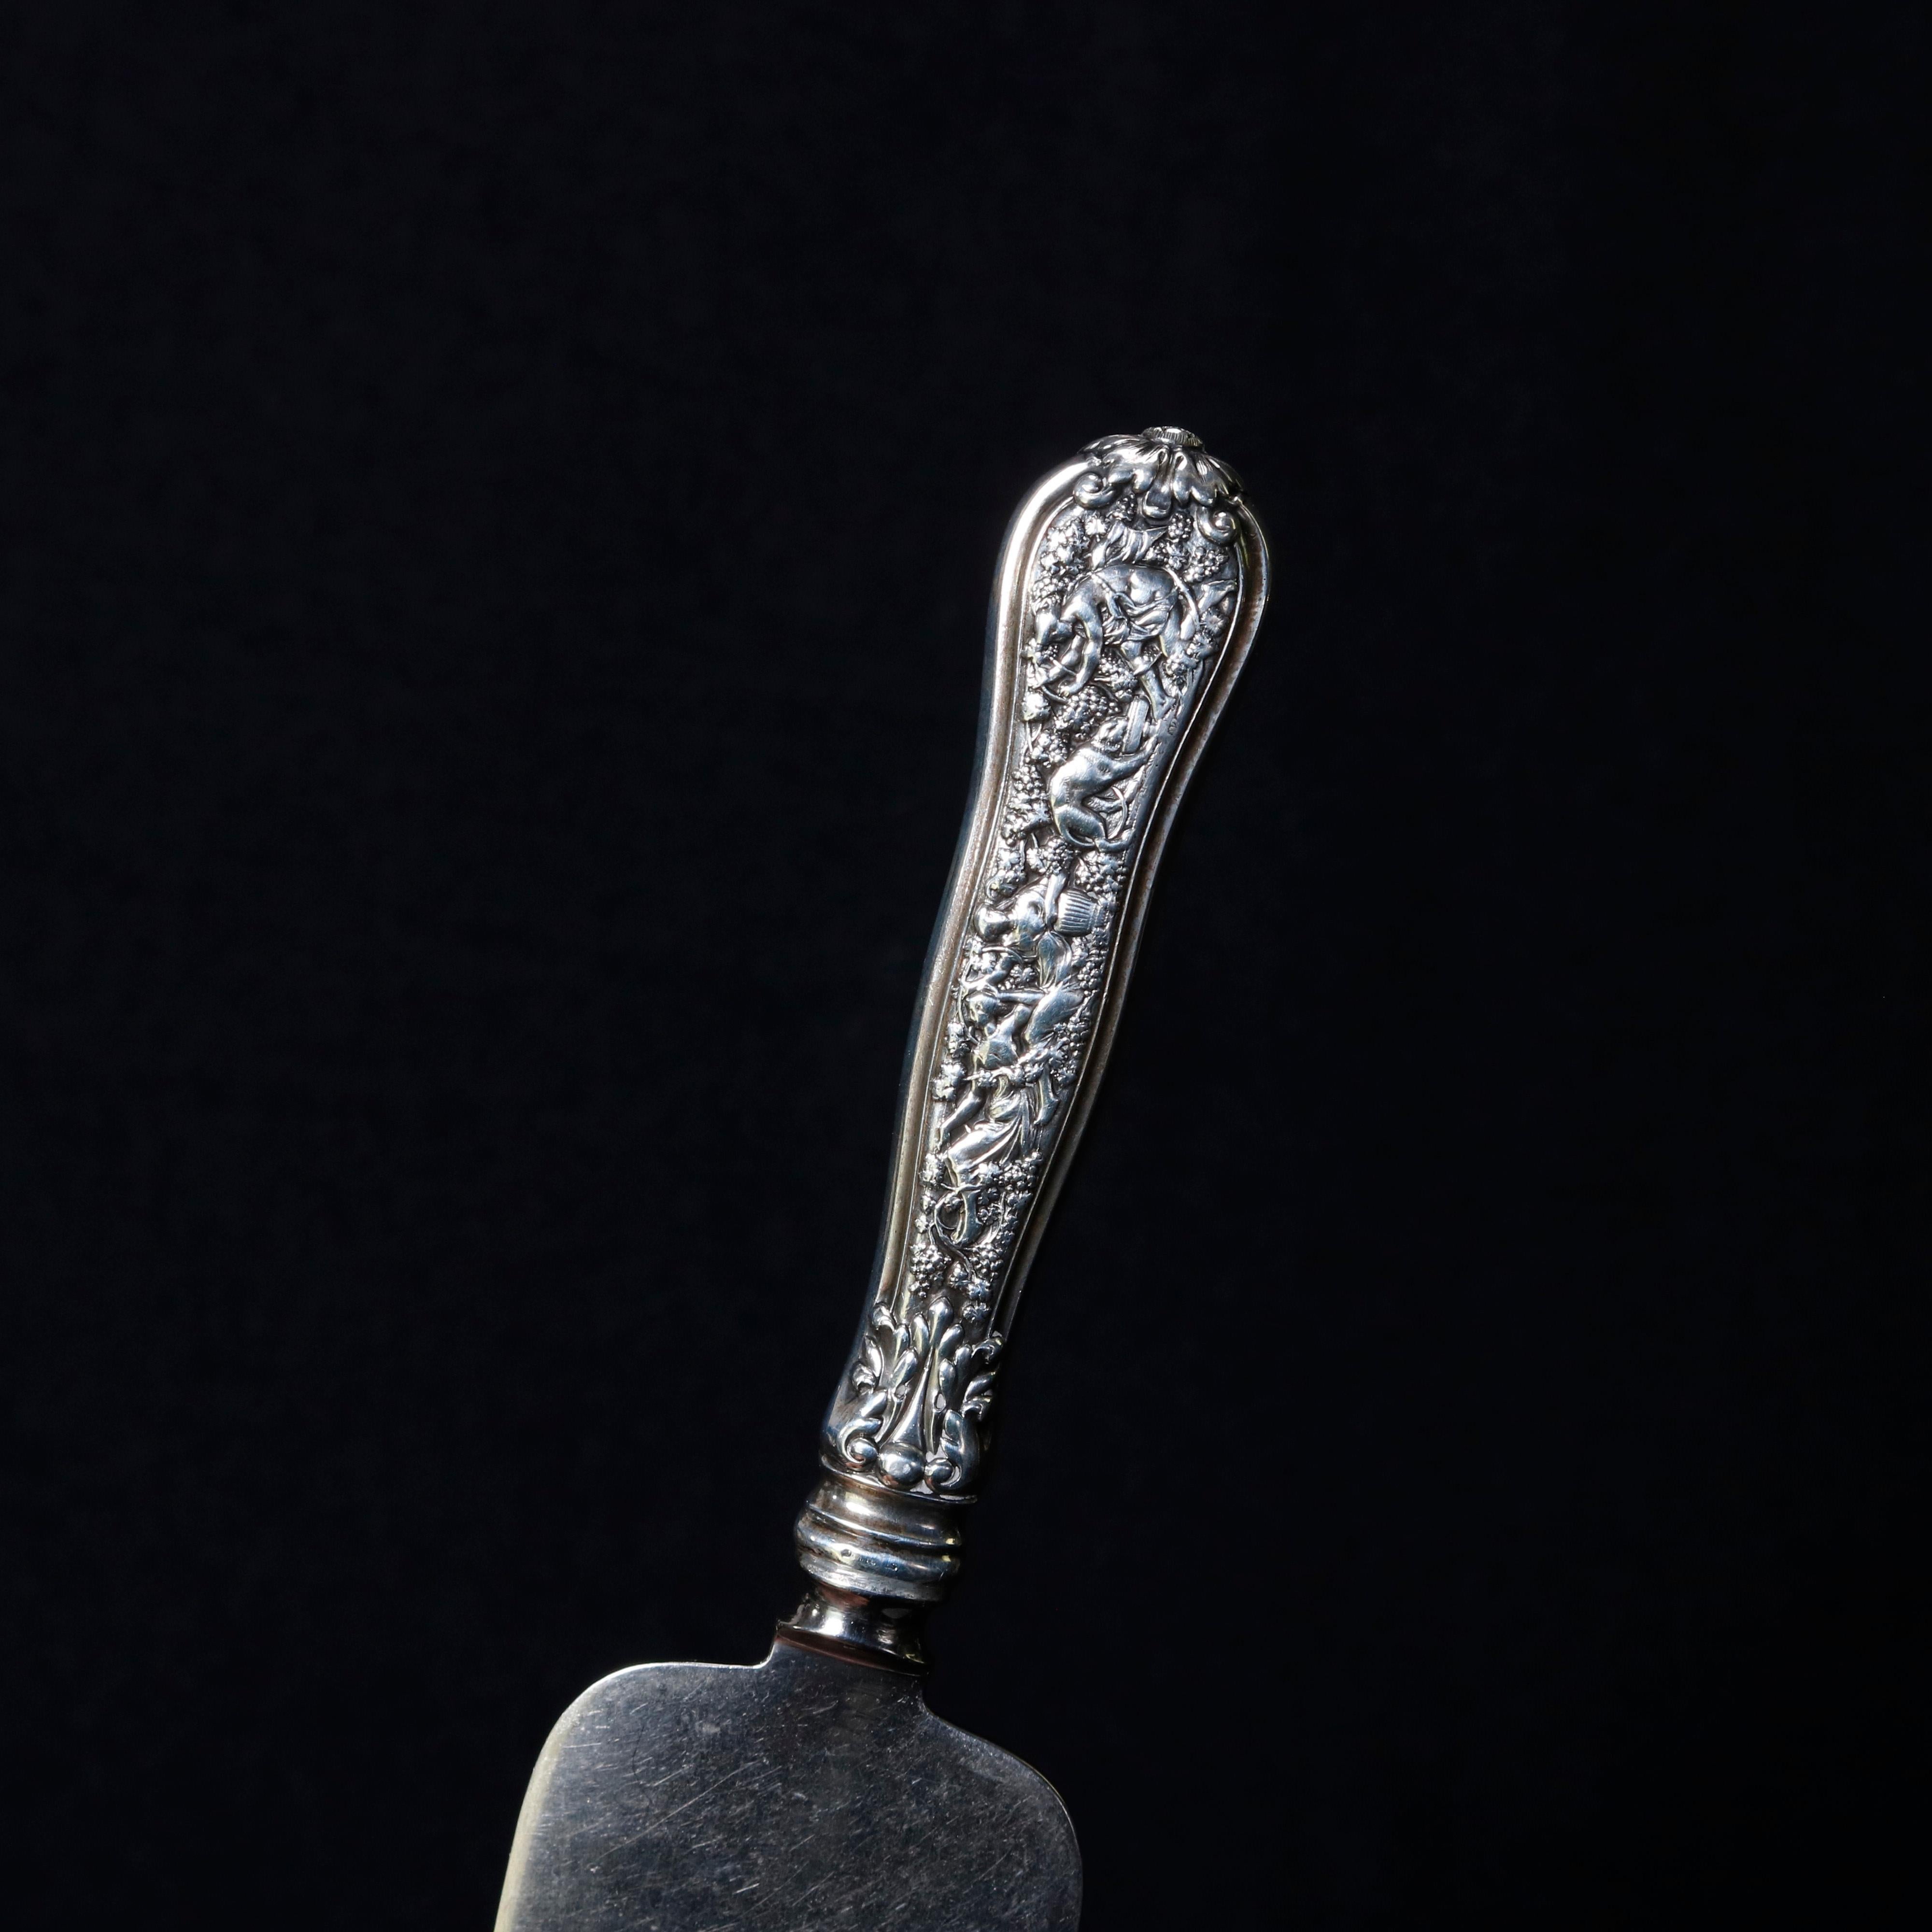 An antique sterling silver cake server by Tiffany & Co. in the Olympian pattern depicts high relief classical scene with figures, circa 1870

***DELIVERY NOTICE – Due to COVID-19 we are employing NO-CONTACT PRACTICES in the transfer of purchased